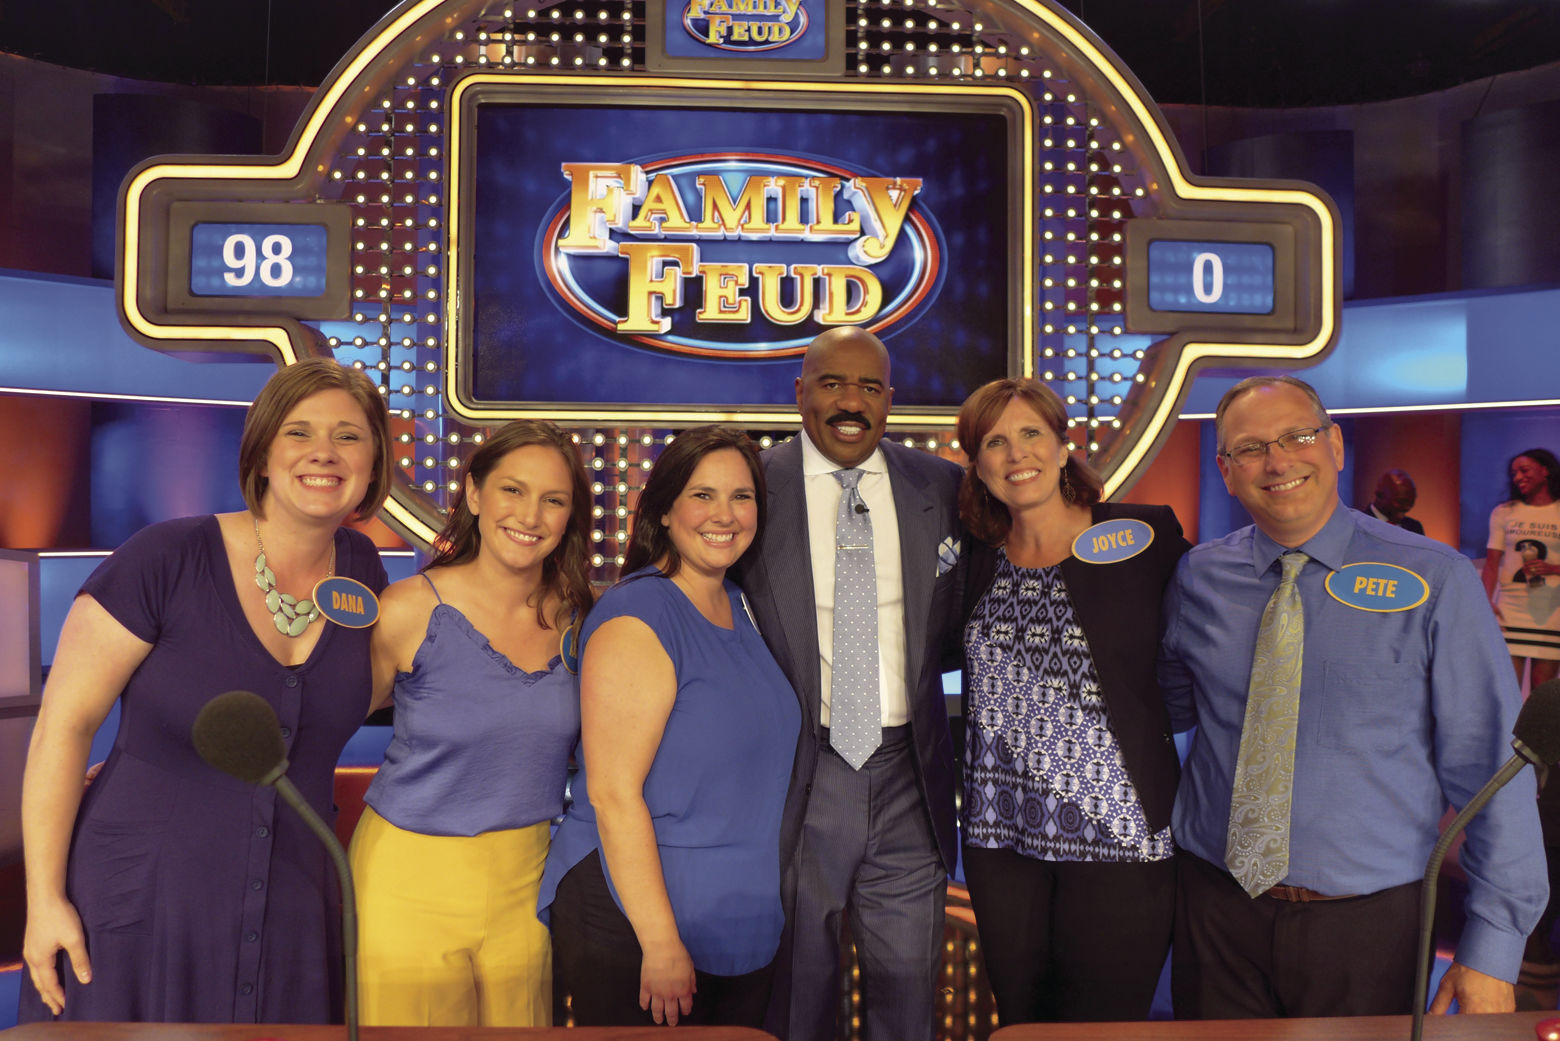 family feud full episodes 2018 free online